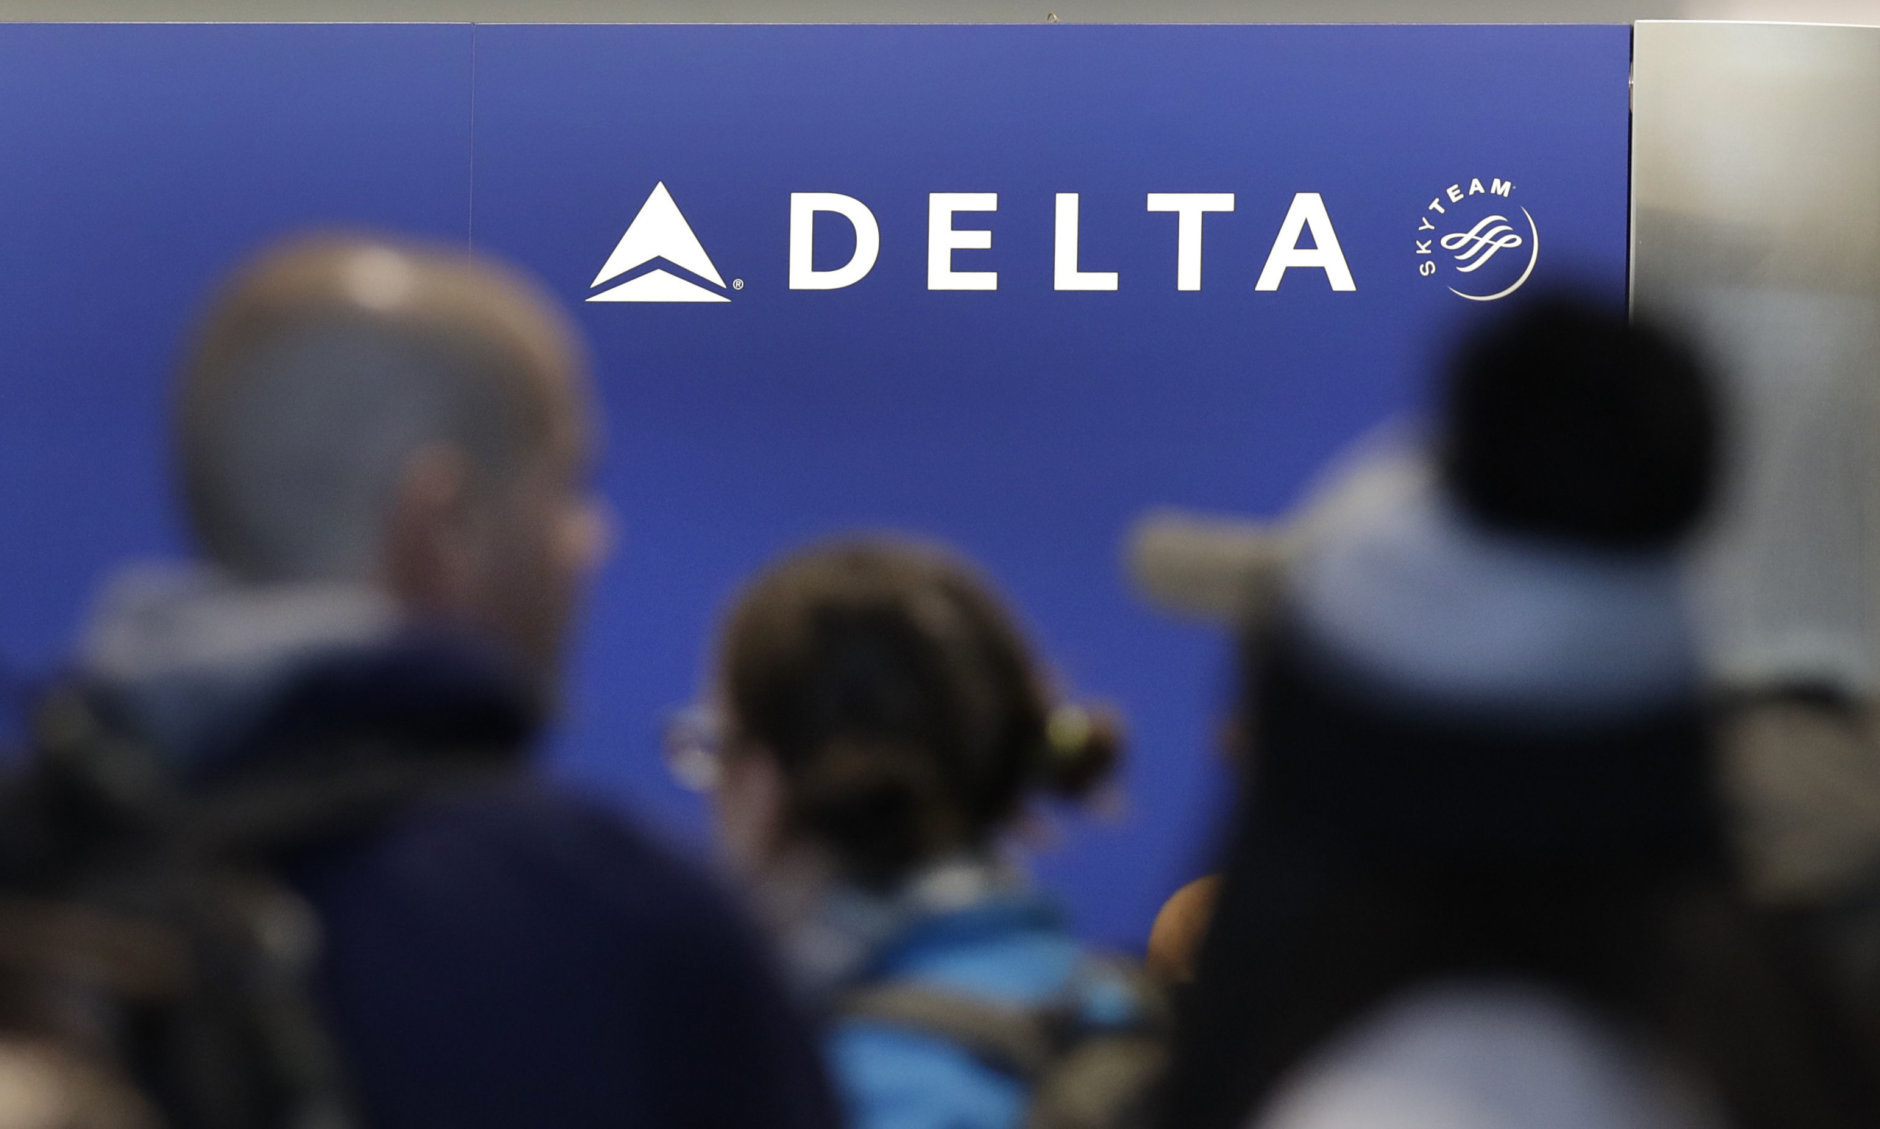 Travelers wait in line at the Delta Air Lines counter at Logan International Airport in Boston, Monday, Jan. 8, 2018. (AP Photo/Charles Krupa)